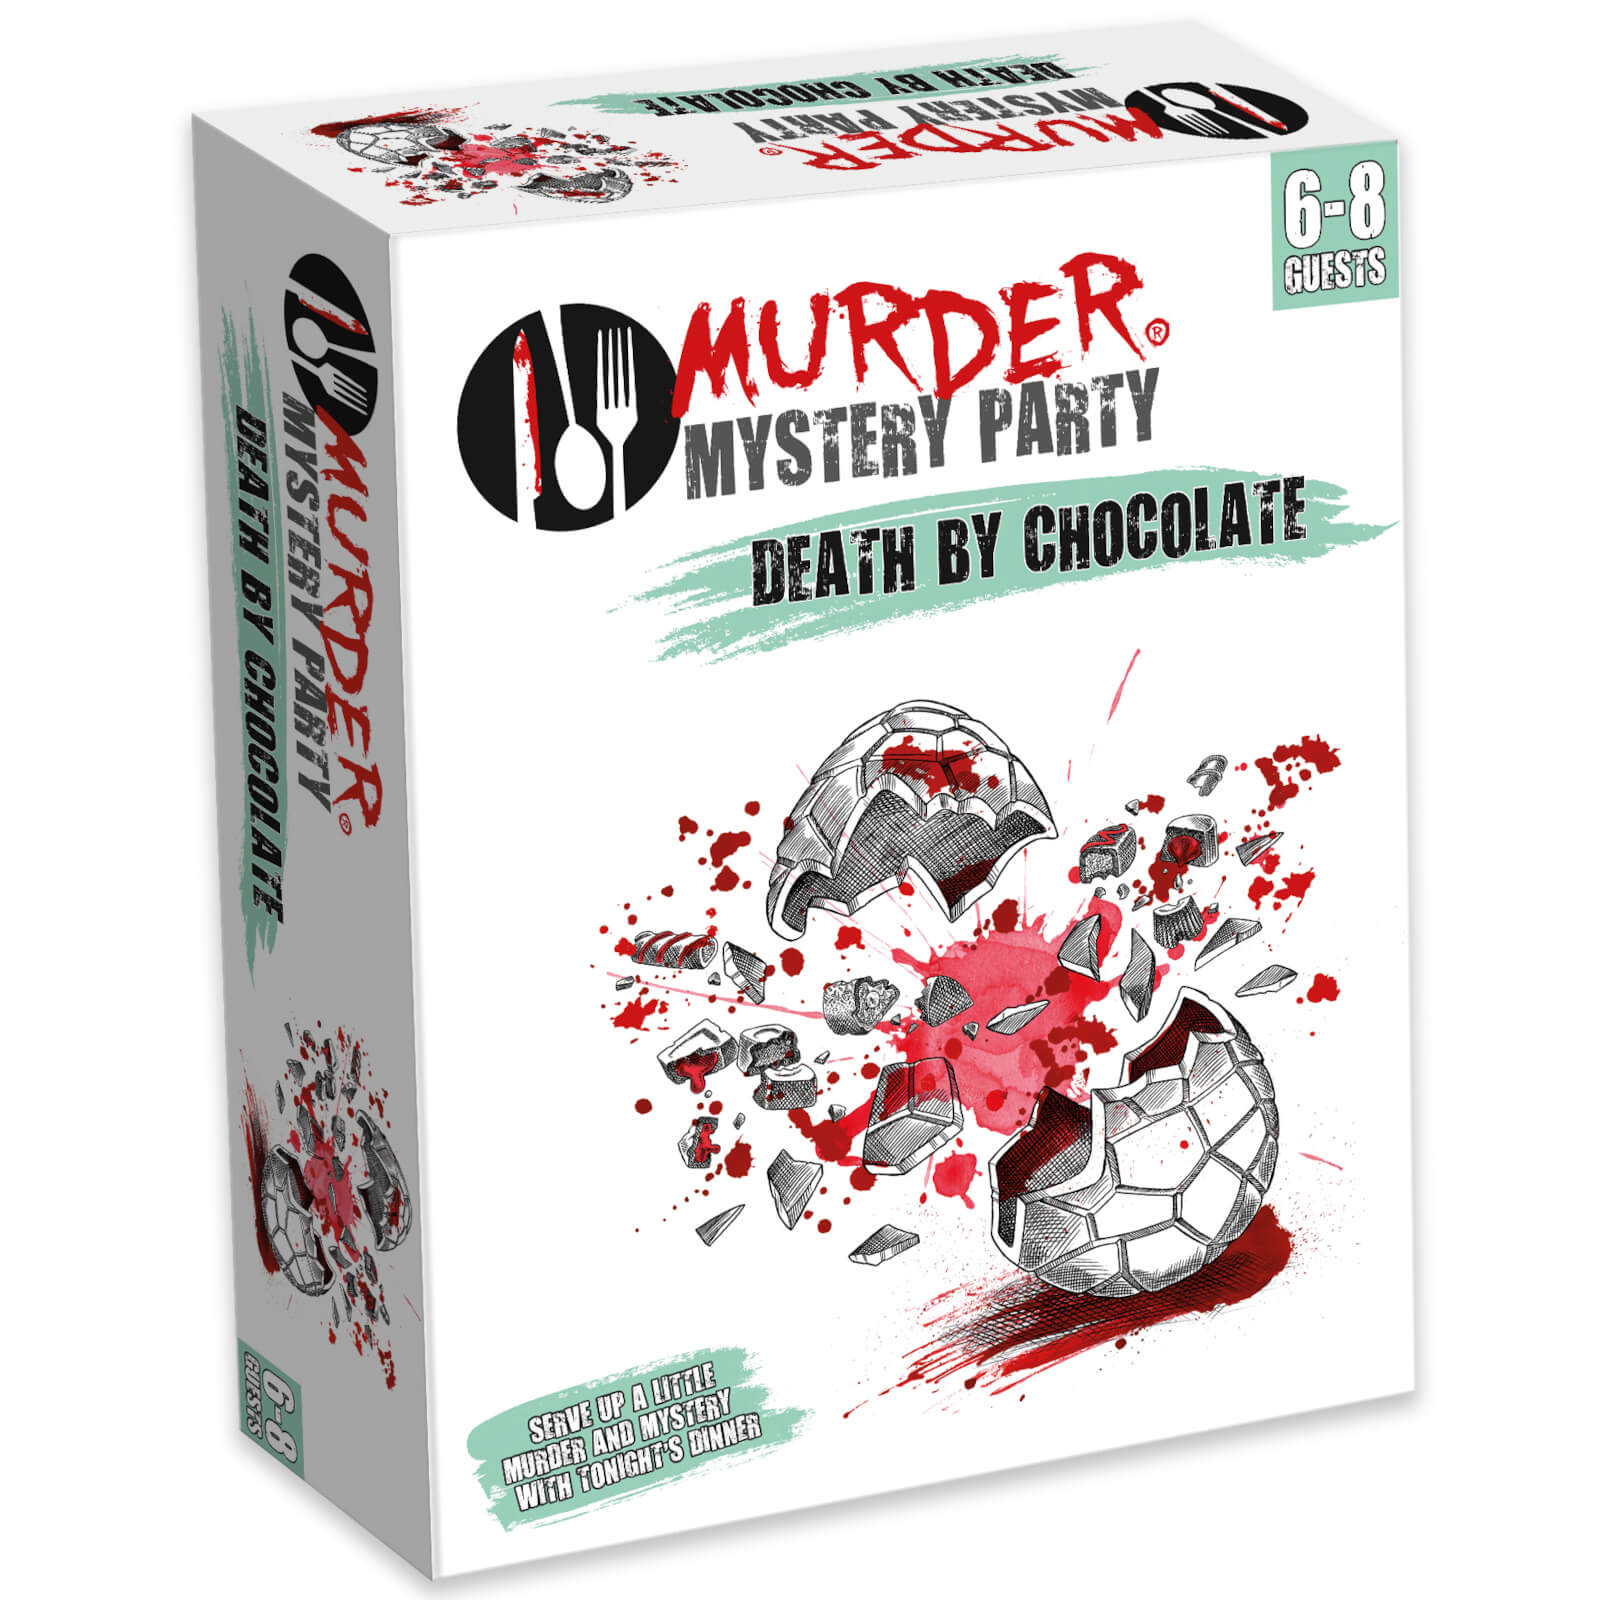 Death by Chocolate Interactive DVD Game (6-8 Players)